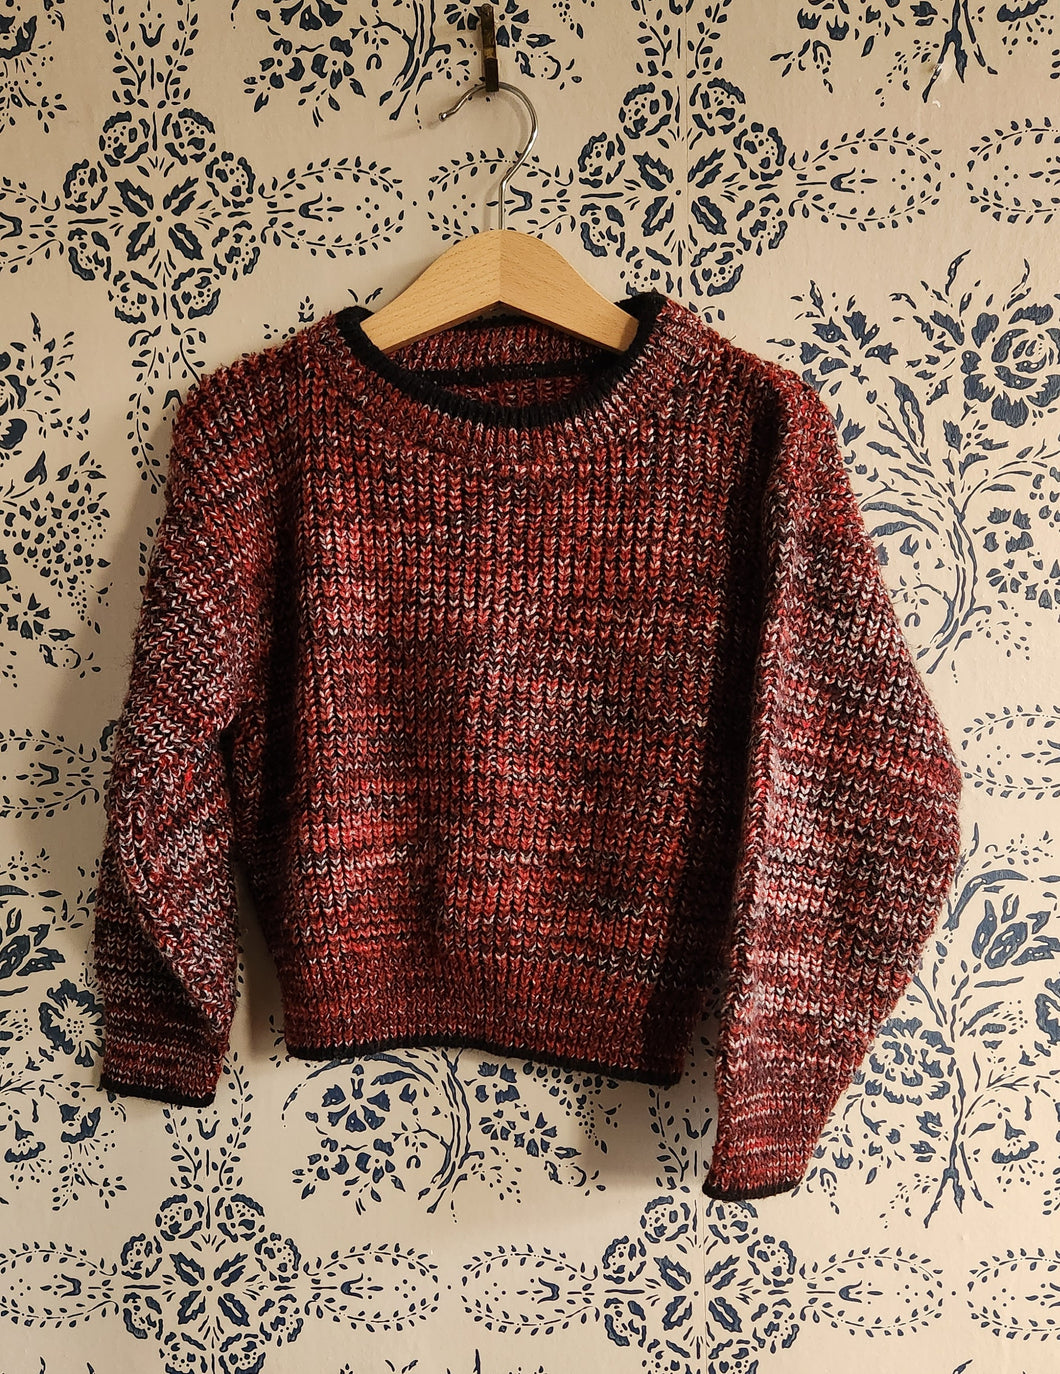 Red Heathered Sweater 3/4